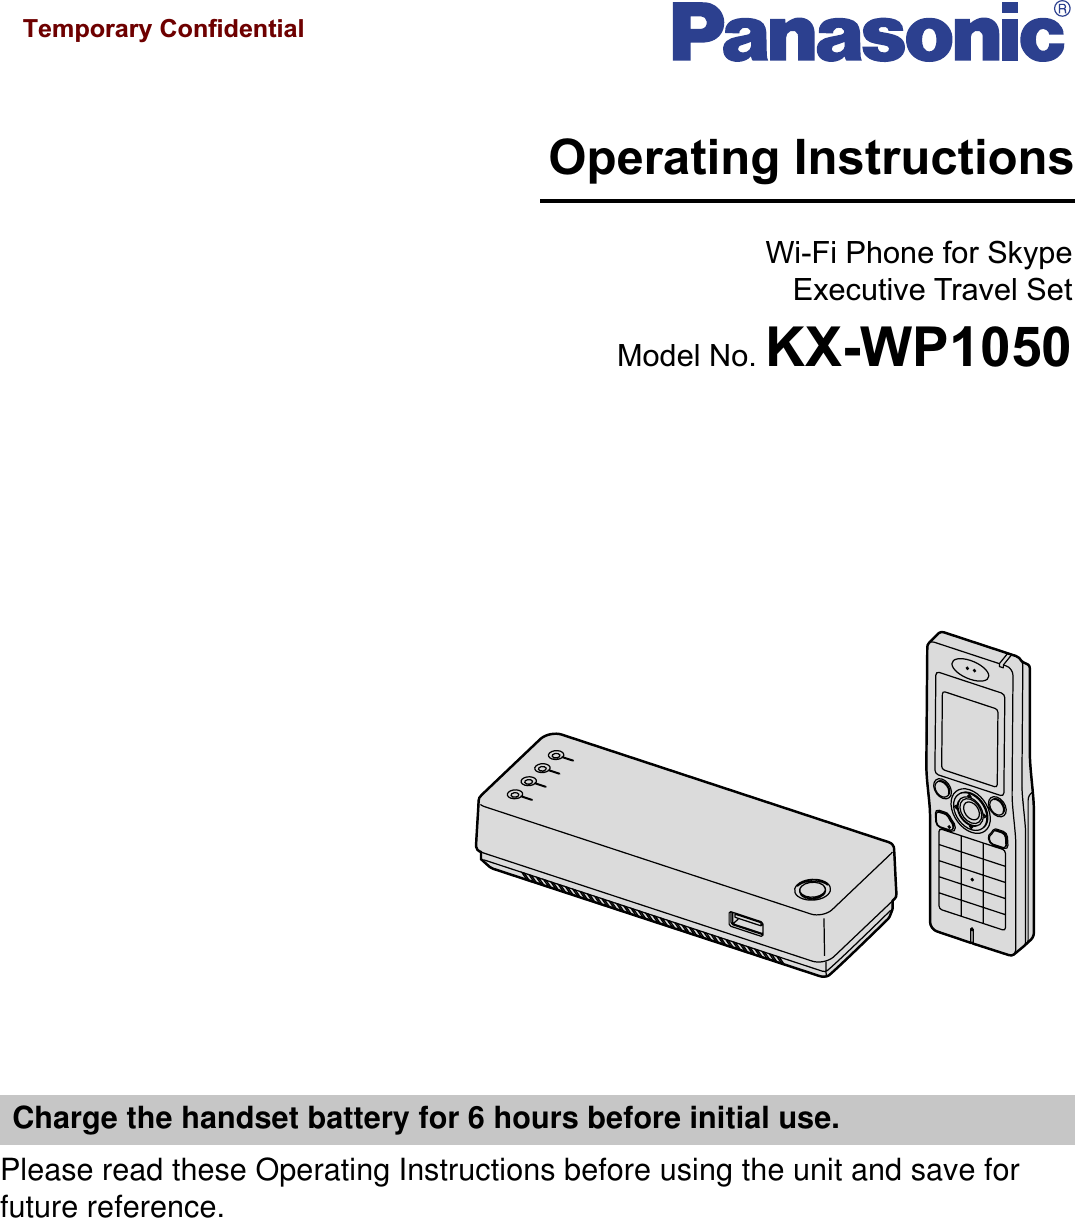 Please read these Operating Instructions before using the unit and save for future reference.Charge the handset battery for 6 hours before initial use.Operating InstructionsWi-Fi Phone for SkypeExecutive Travel SetModel No. KX-WP1050Temporary Confidential